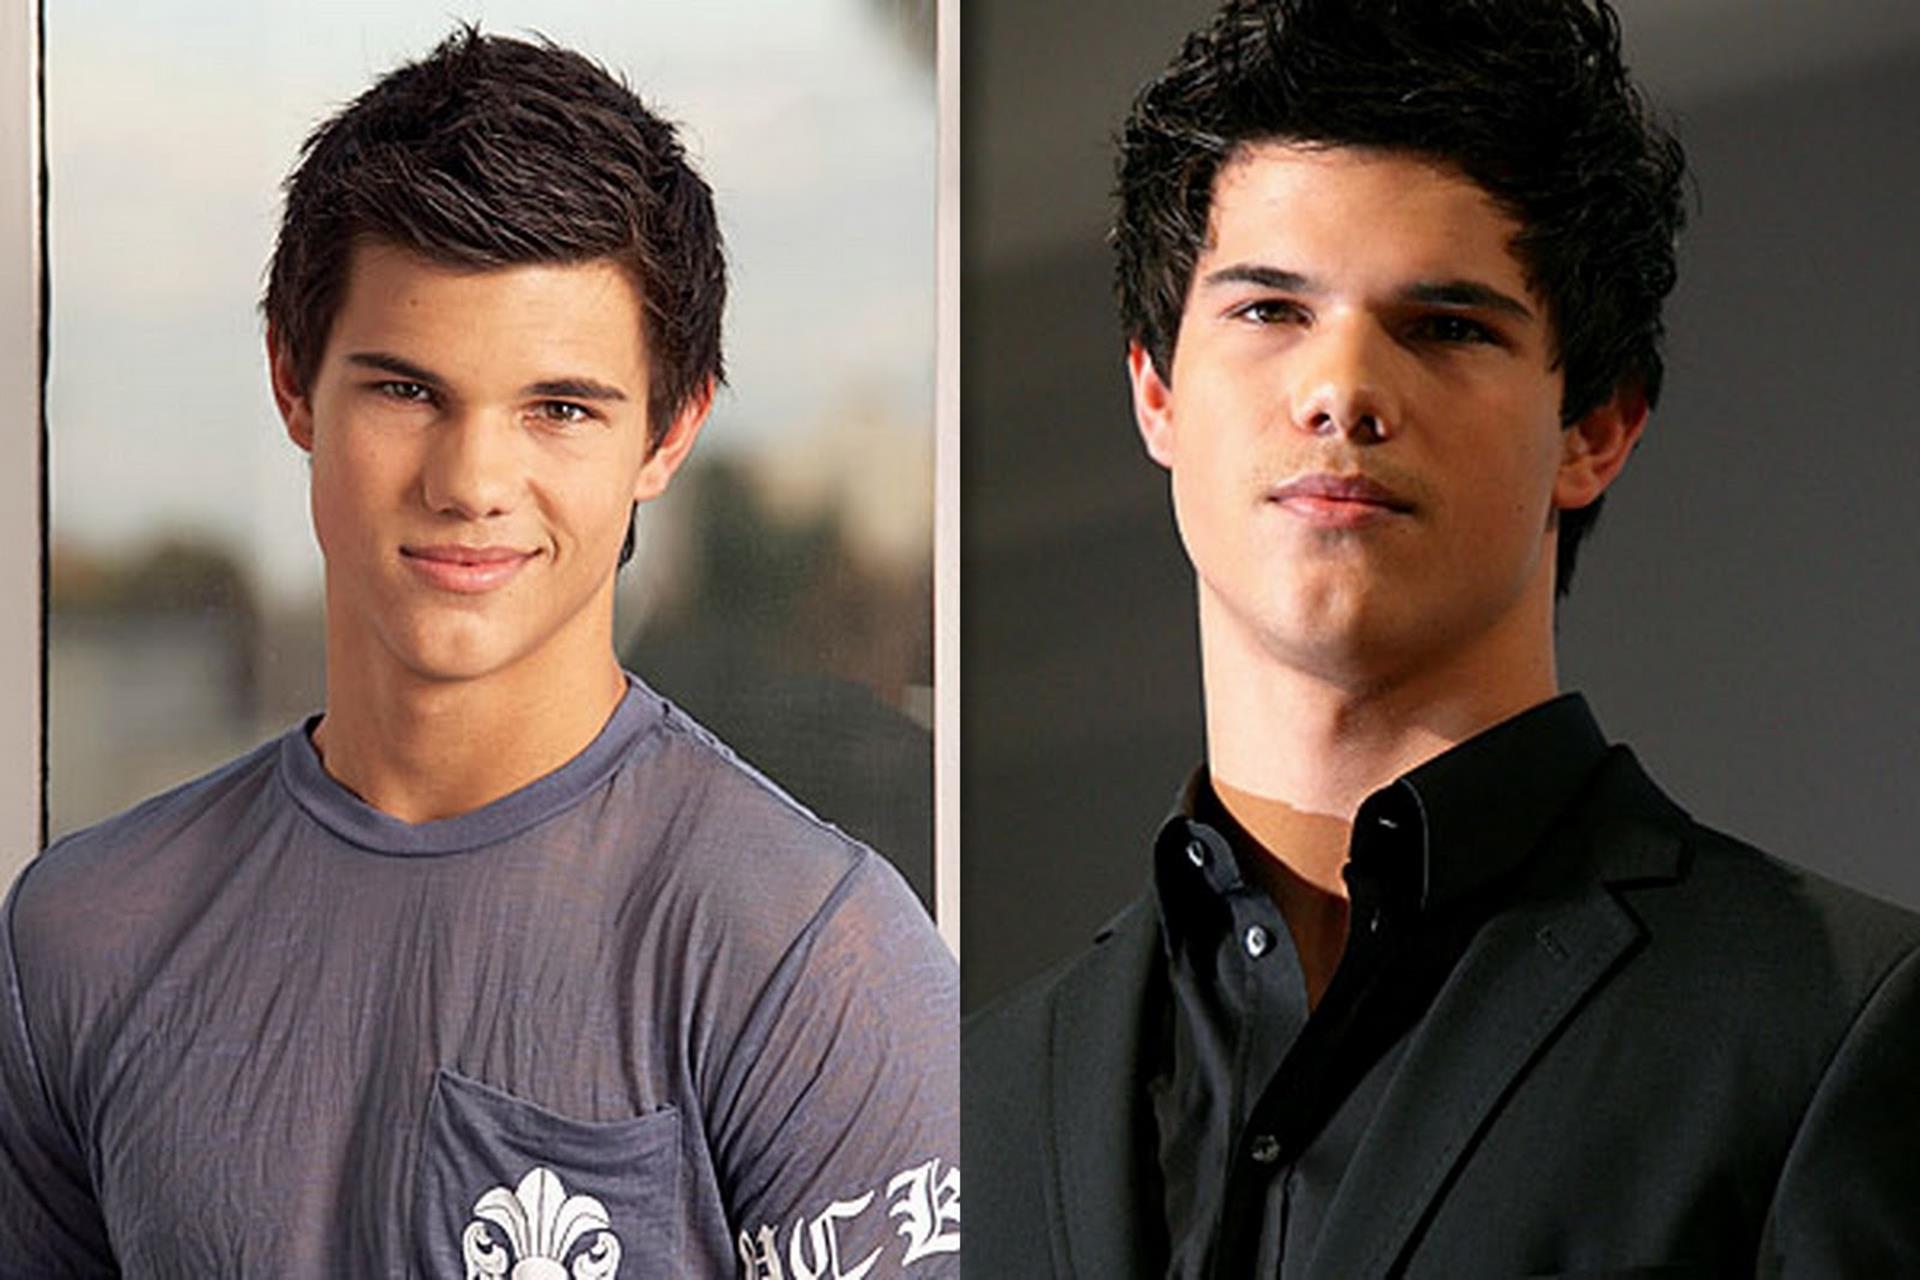 Get awesome Taylor Lautner HD images in each new Chrome tab! 